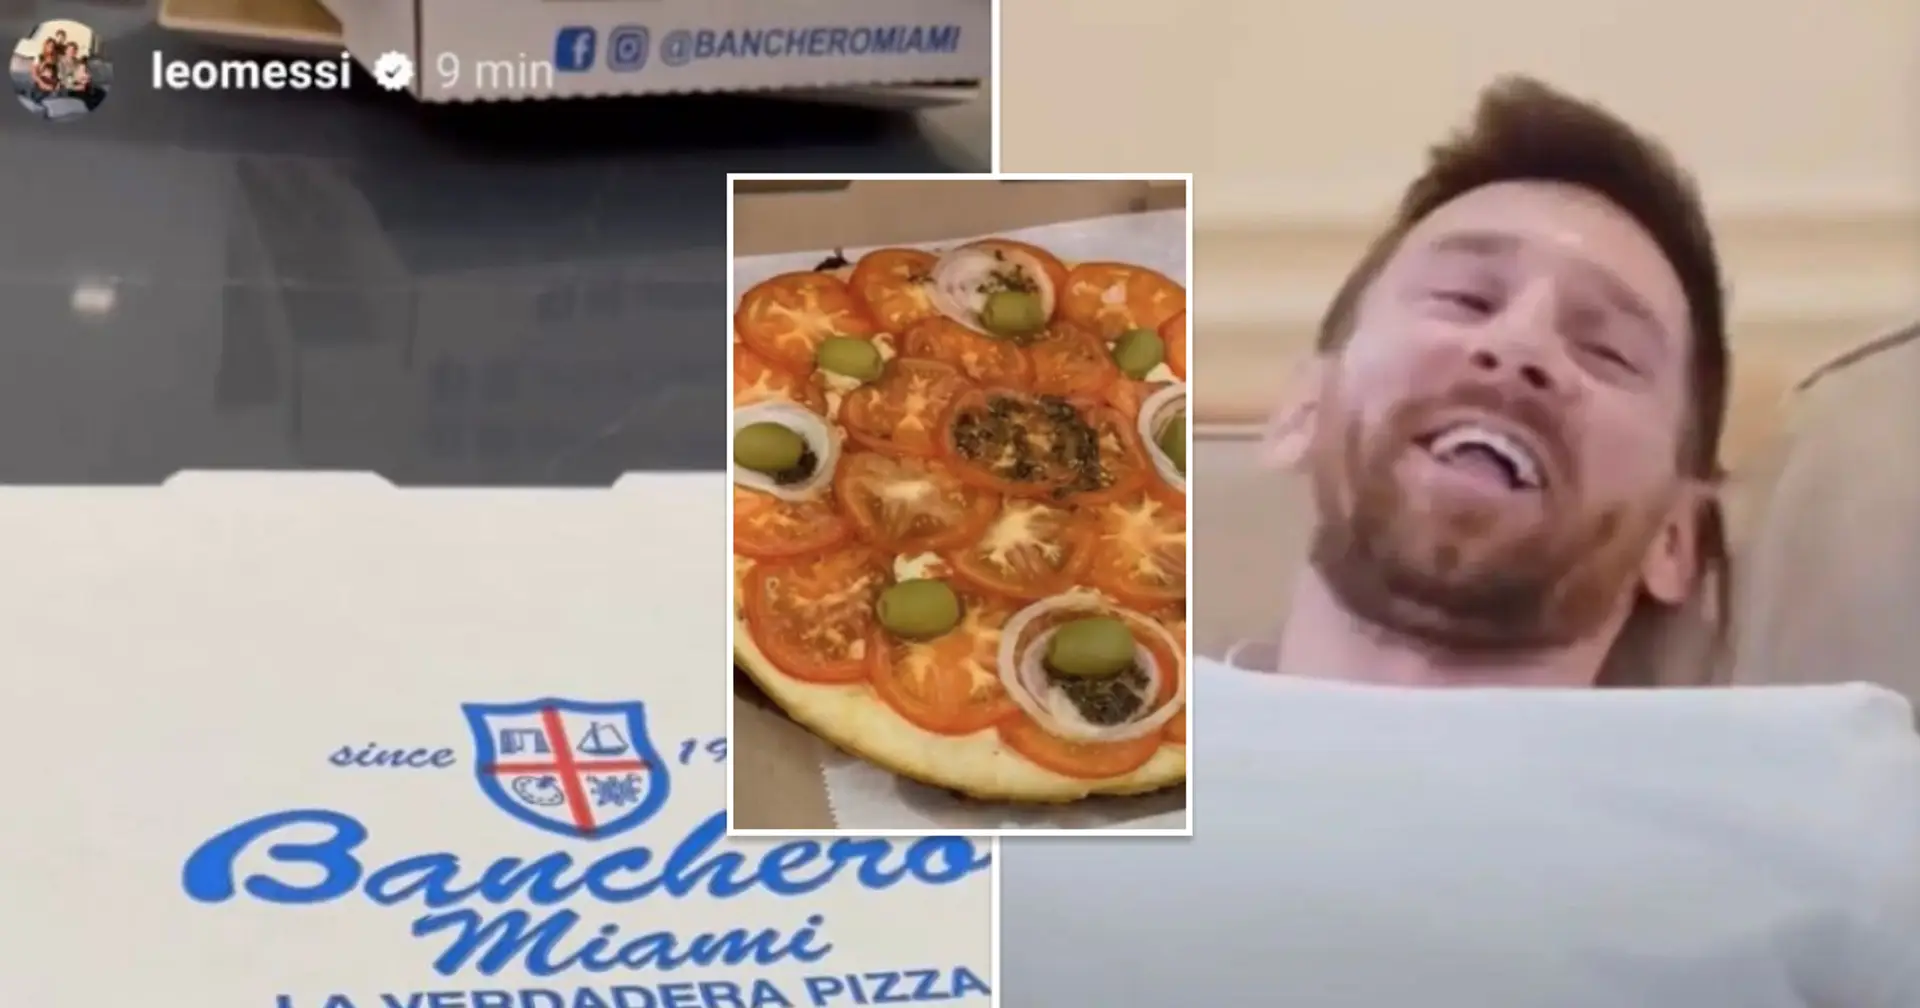 Leo Messi all but confirms he'll miss next Inter Miami game with Instagram post featuring 'worst pizza fans have ever seen'